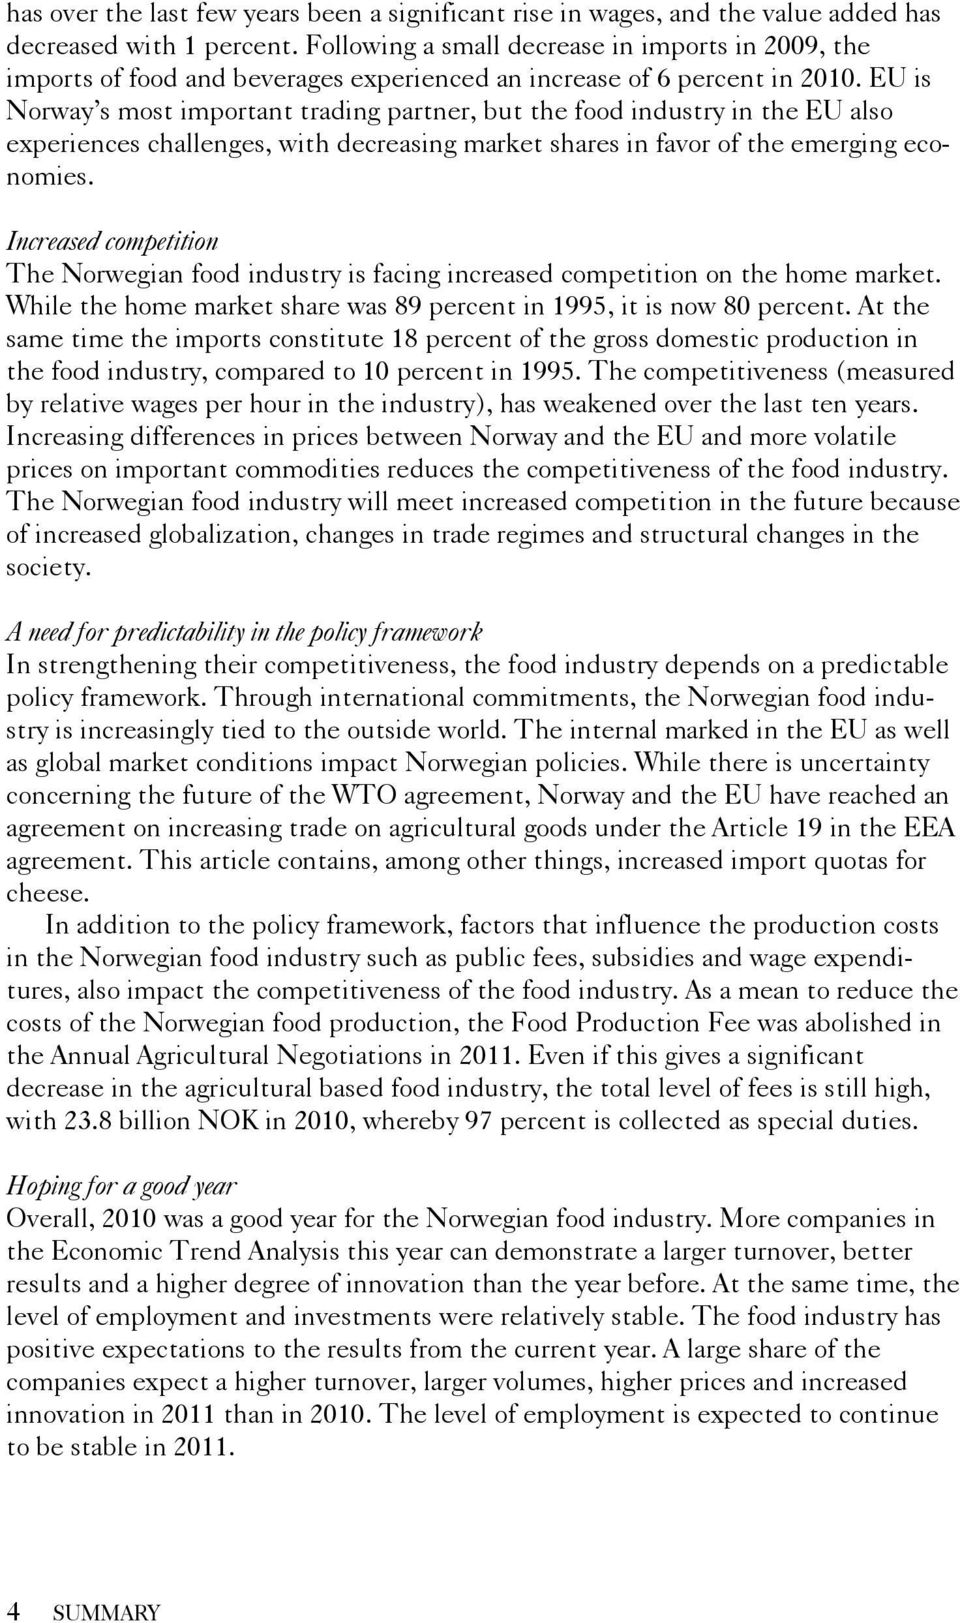 EU is Norway s most important trading partner, but the food industry in the EU also experiences challenges, with decreasing market shares in favor of the emerging economies.